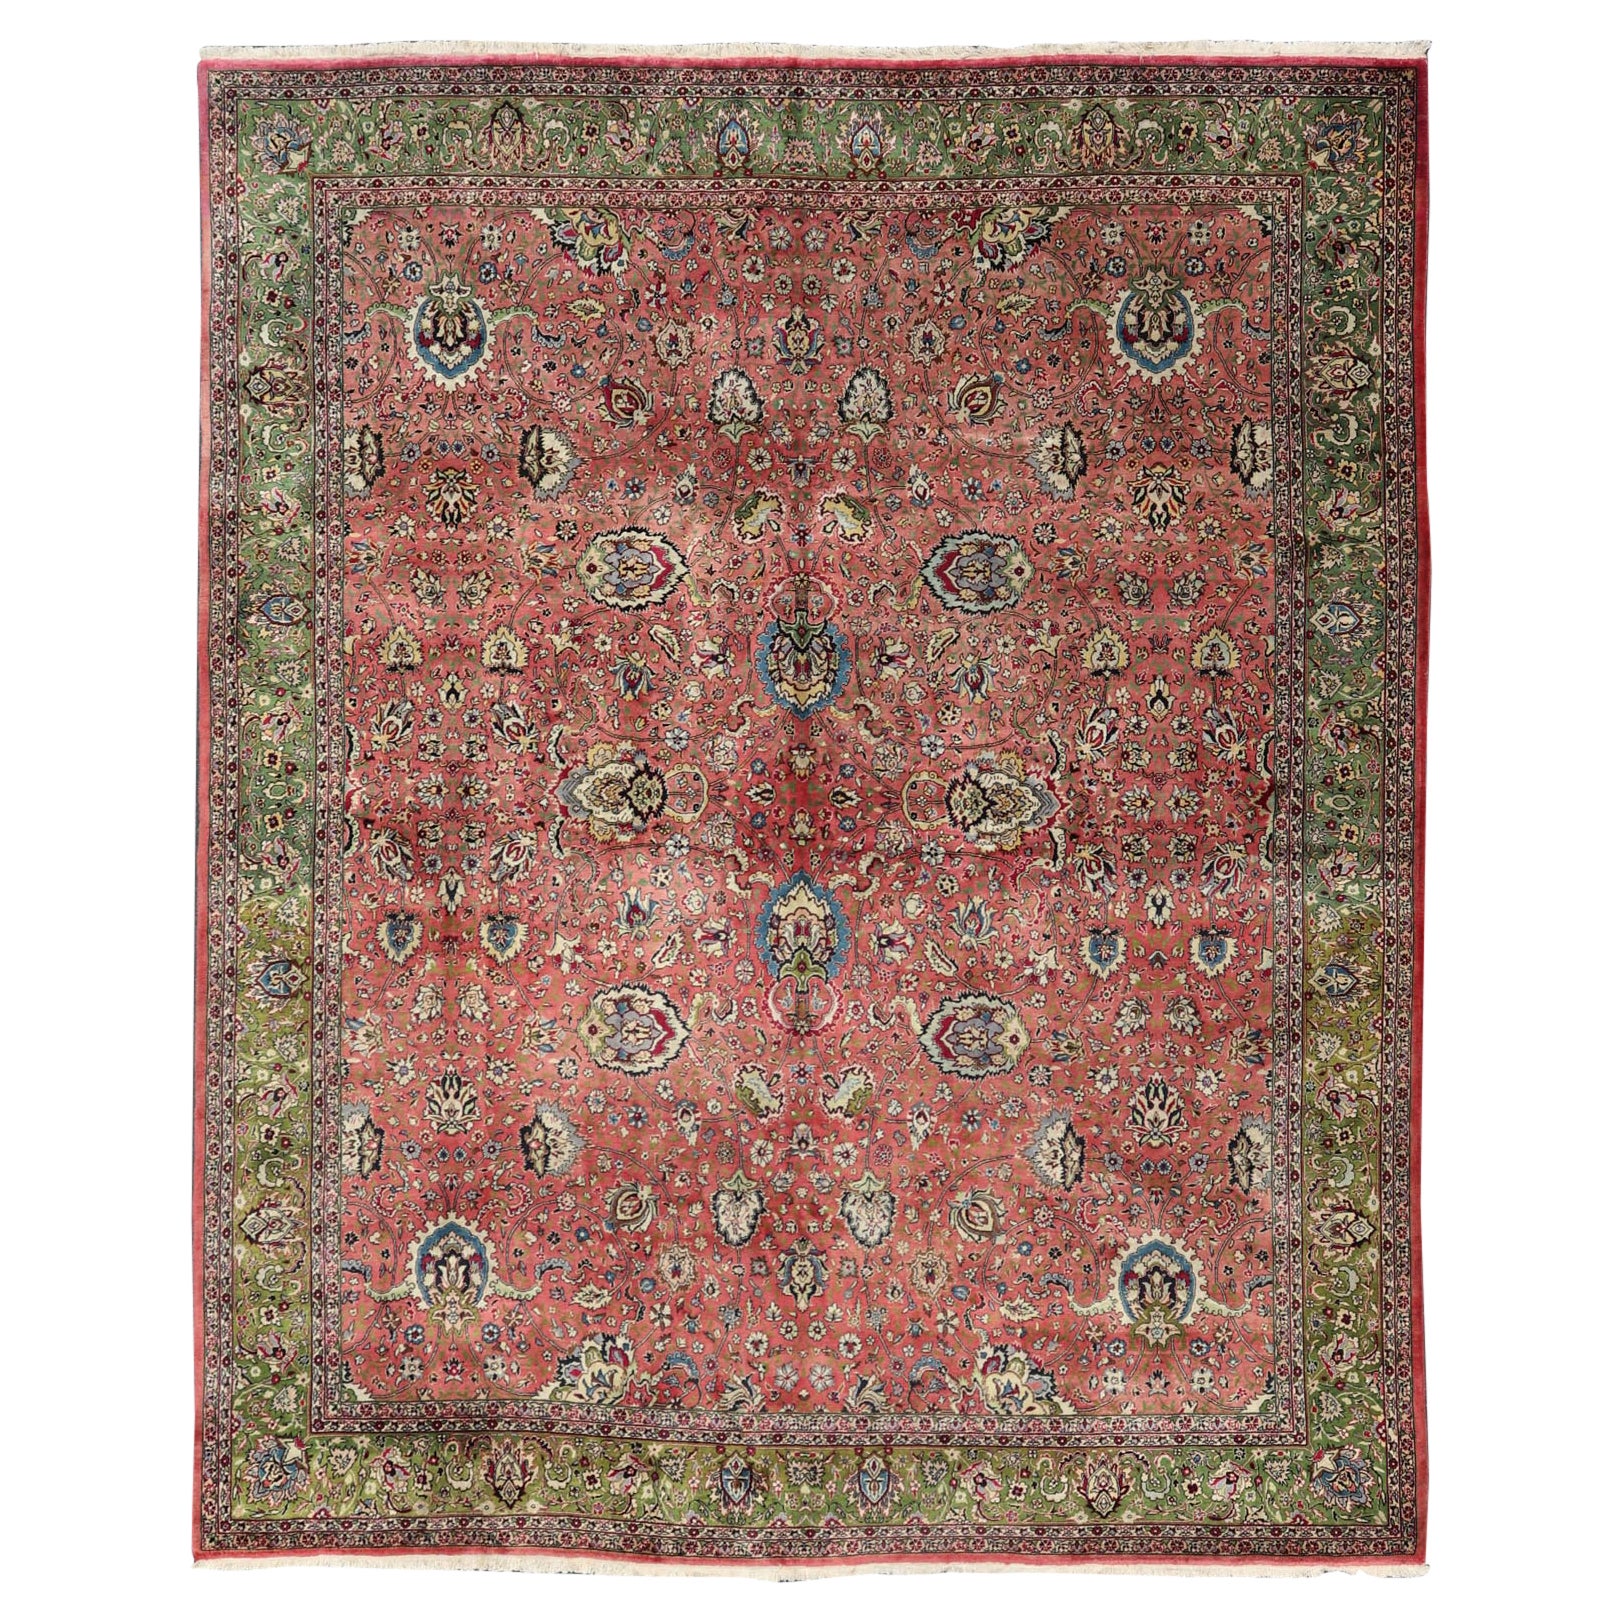 Large Square Size Vintage Persian Tabriz Rug  in Coral Pink and Acid Green For Sale